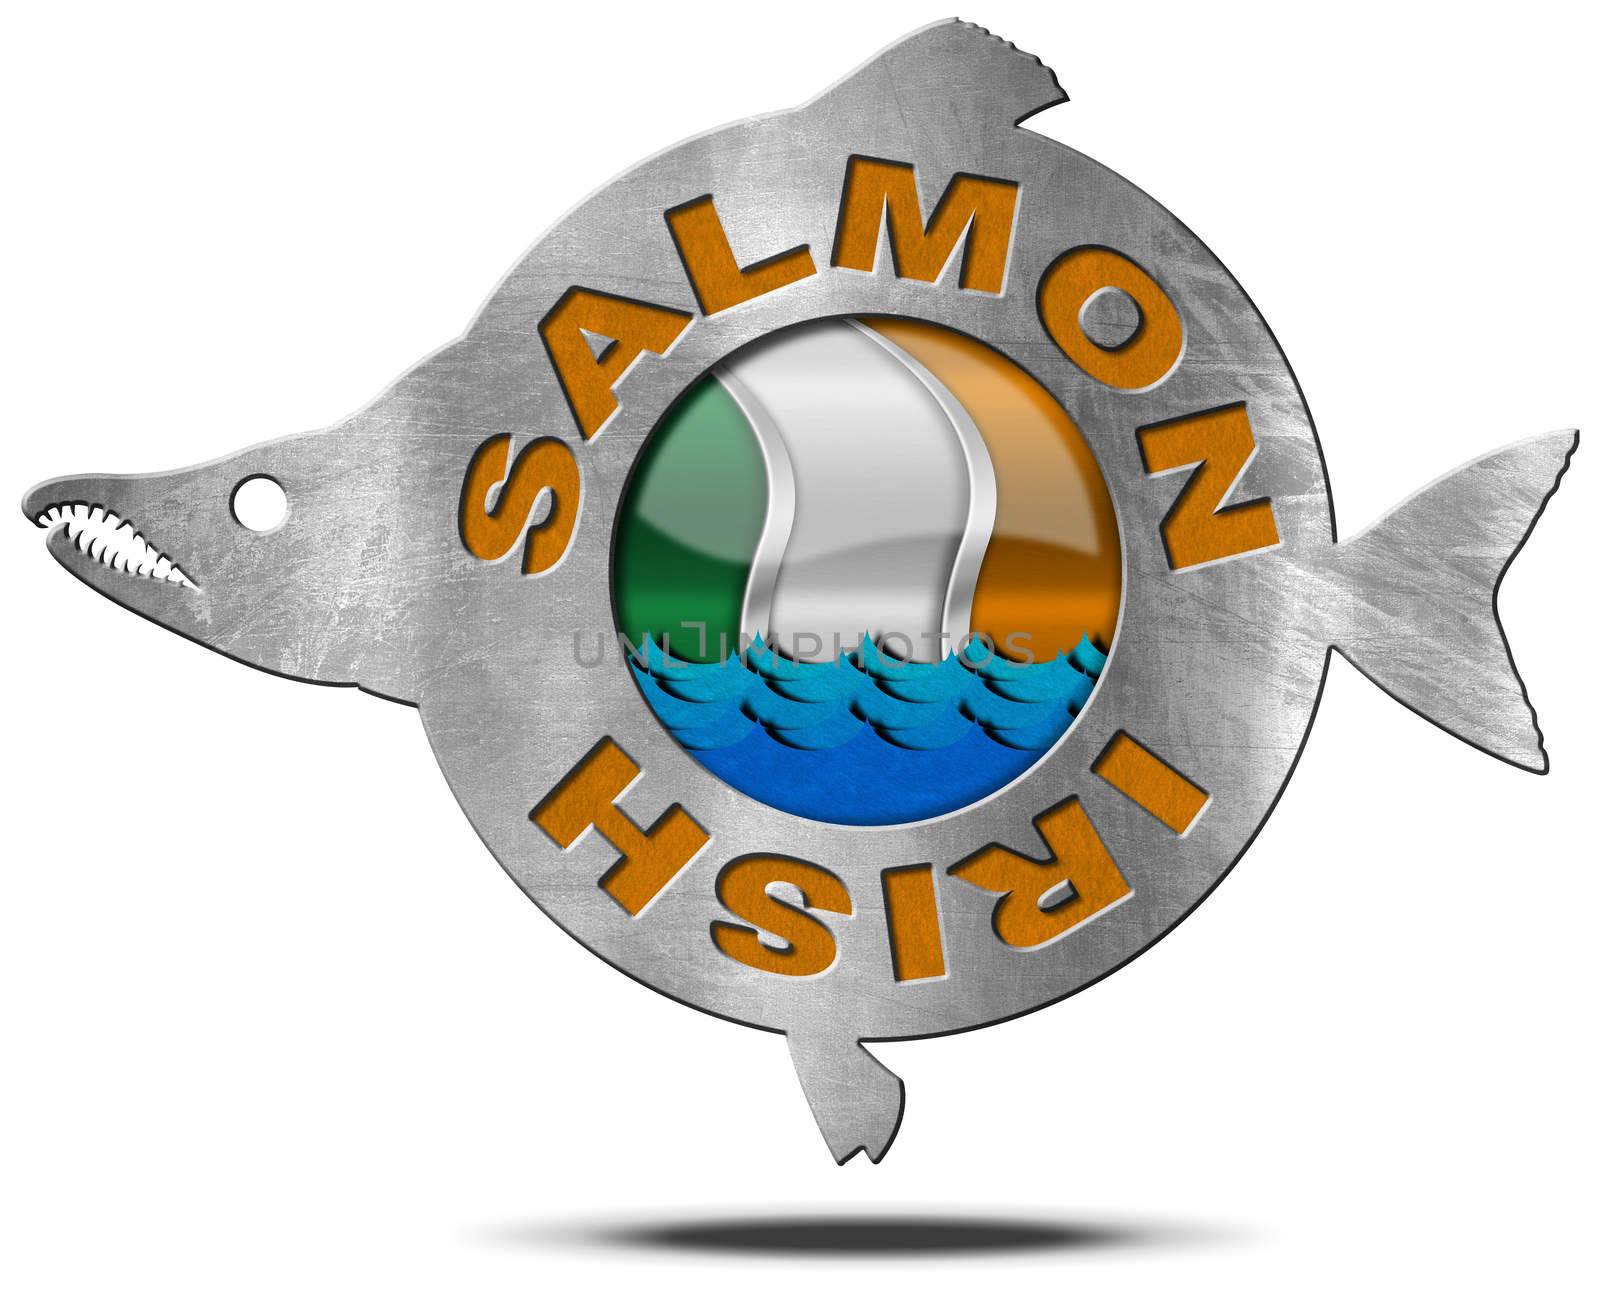 Metallic icon or symbol in the shape of a salmon fish with text Irish Salmon, blue waves and Irish flag. Isolated on a white background